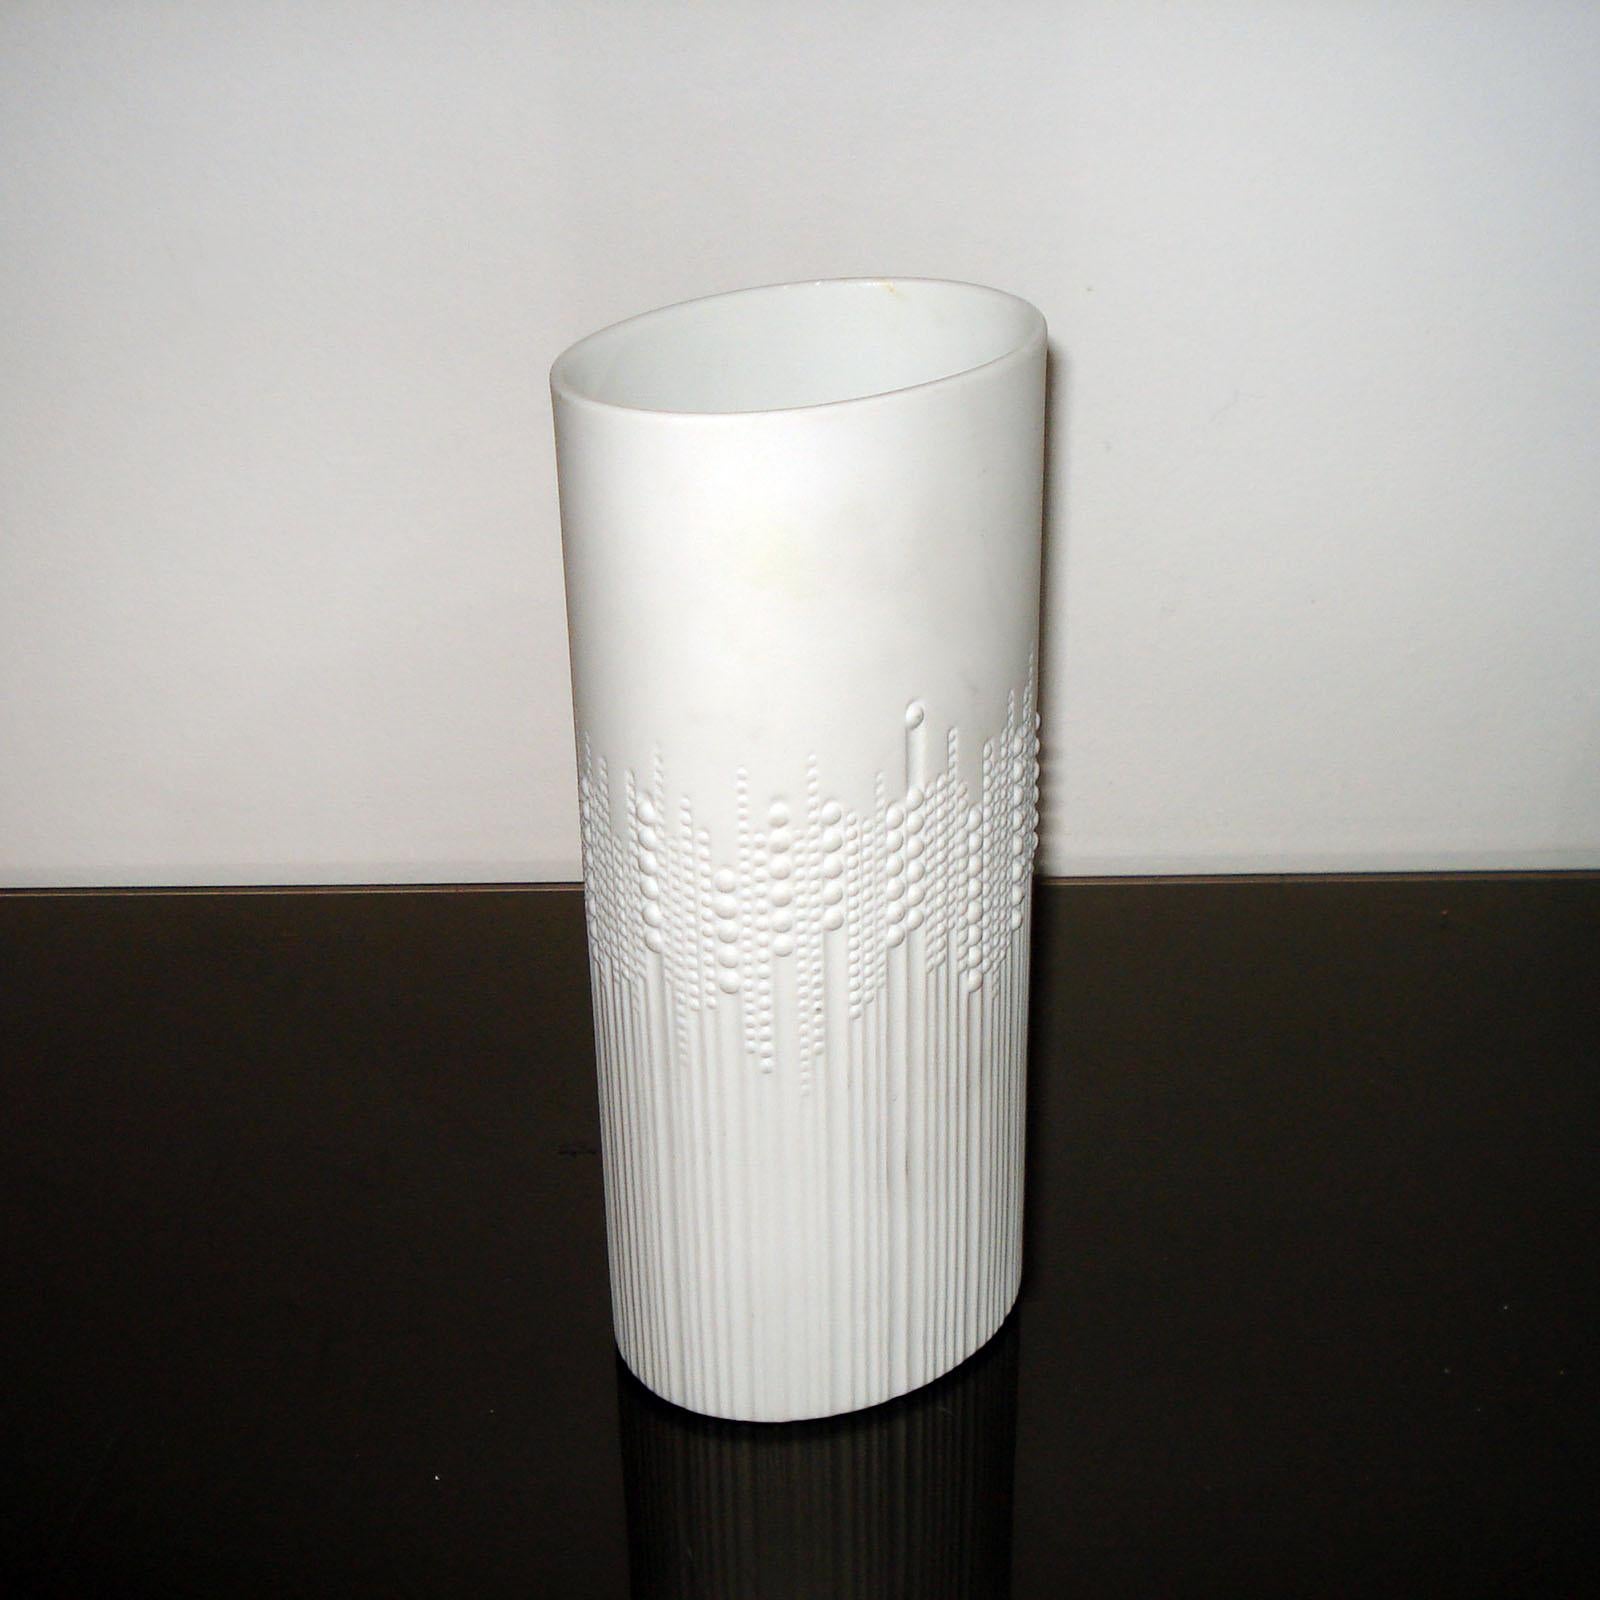 Late 20th Century German Porcelain Vase by Tapio Wirkkala for Rosenthal, 1980s For Sale